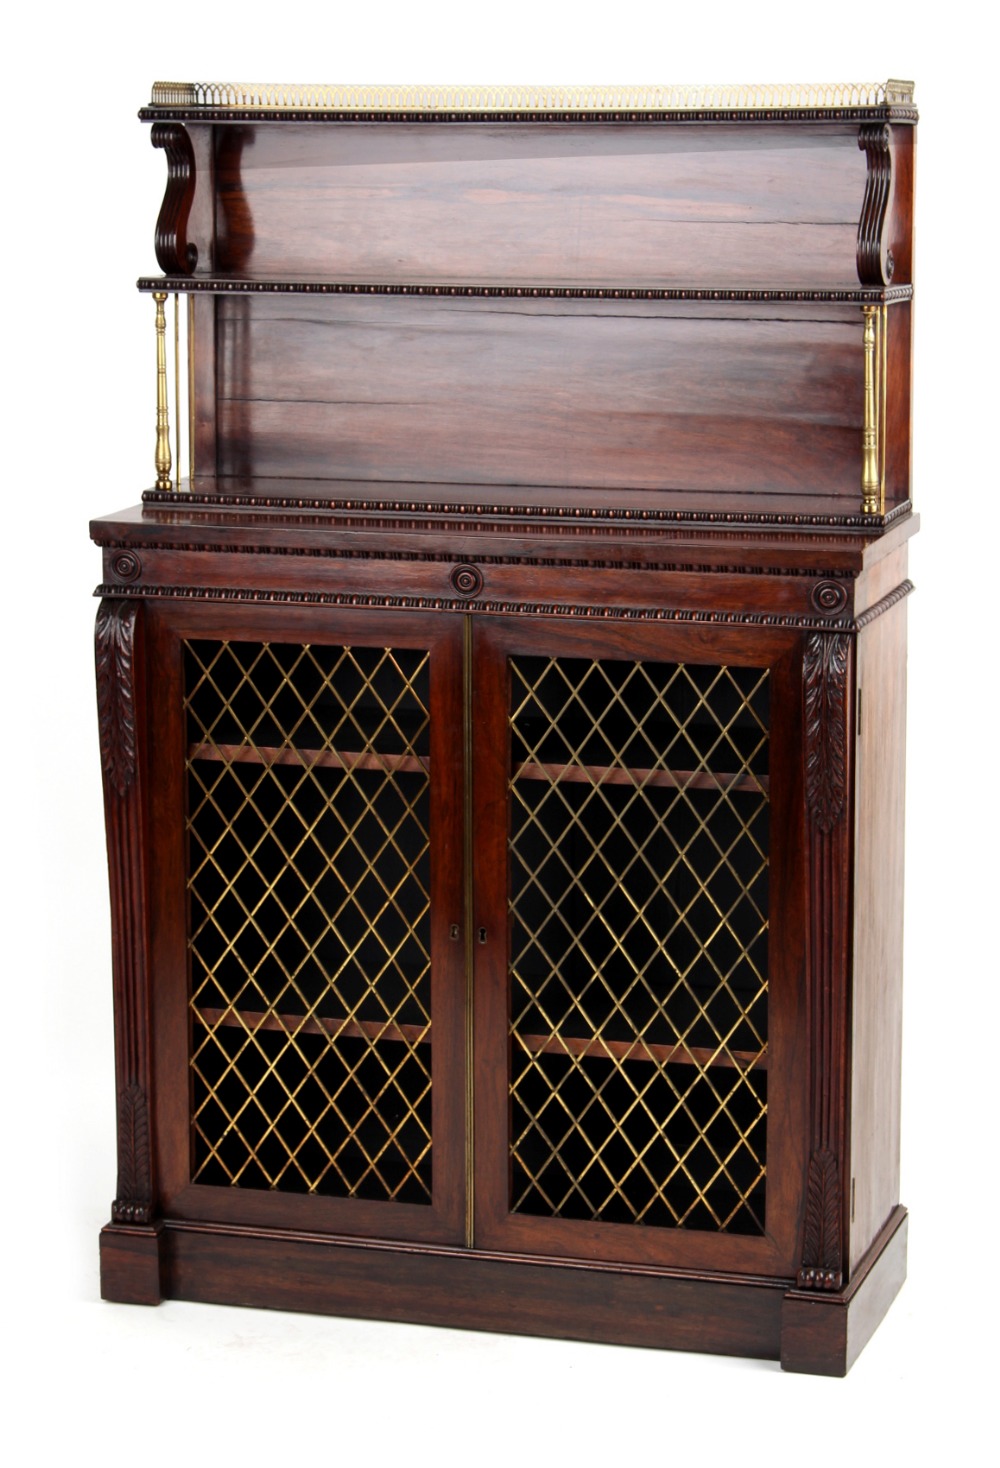 Property of a gentleman - a good quality early 19th century Regency period rosewood chiffonier,